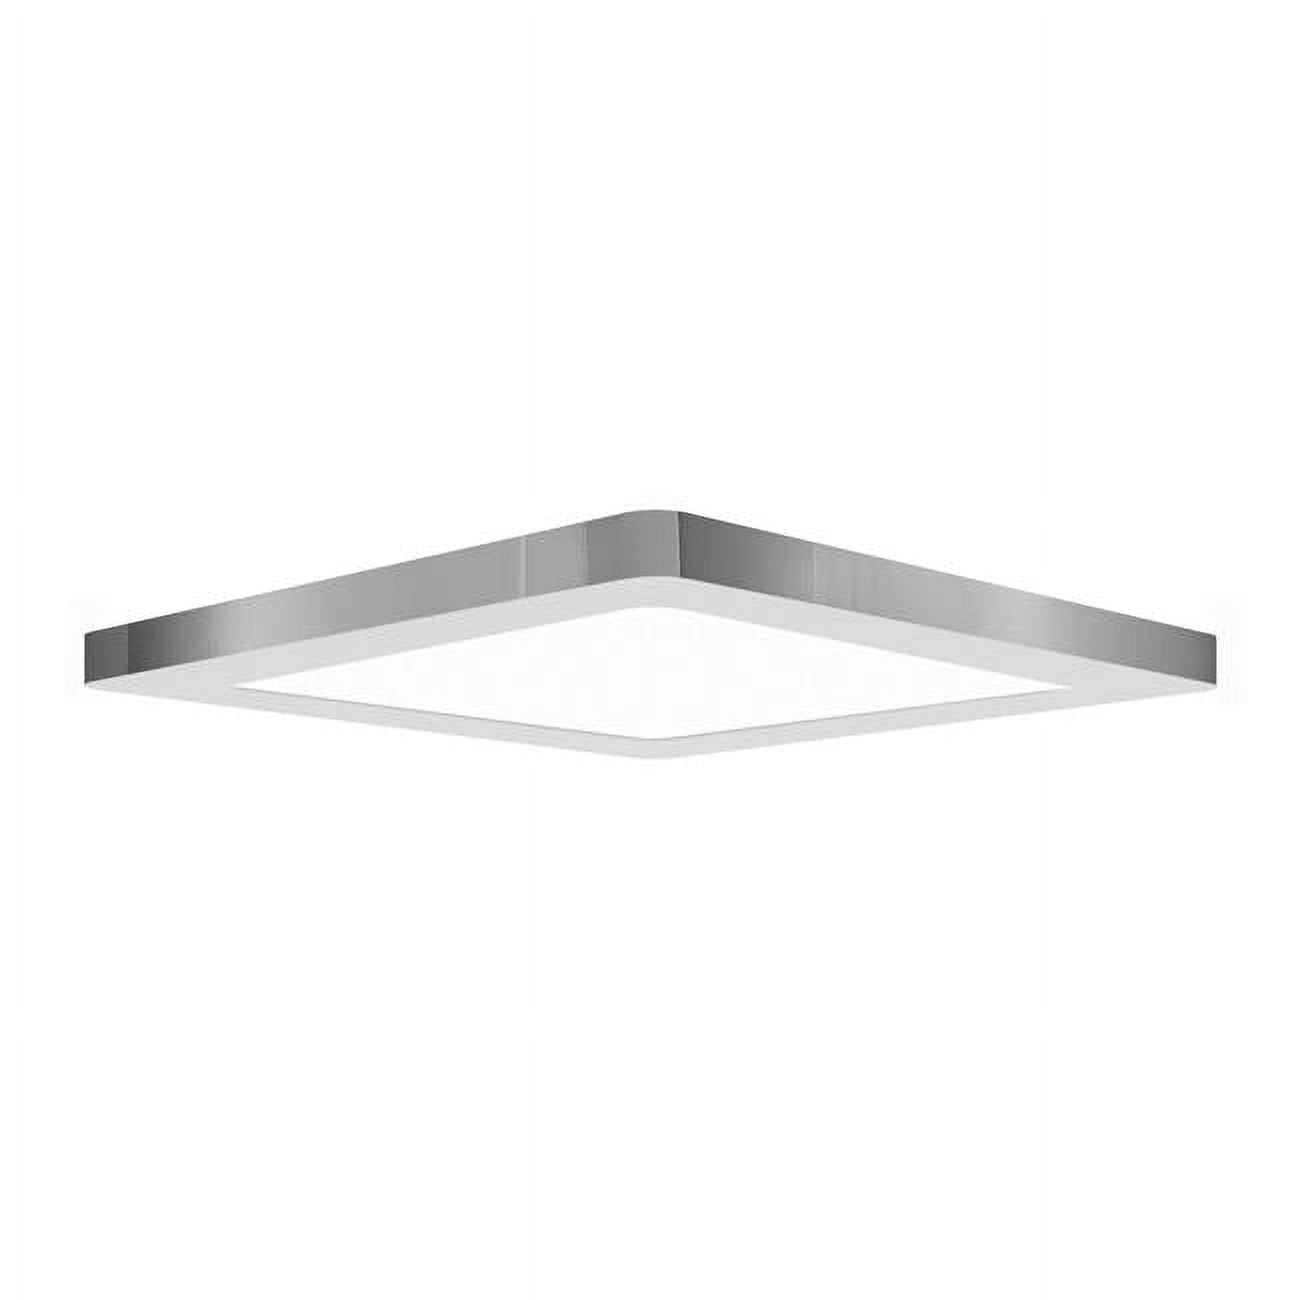 Picture of Access Lighting 20835TRIM-CH 12 in. ModPLUS Chrome Trim Recessed for 20835 & 20841